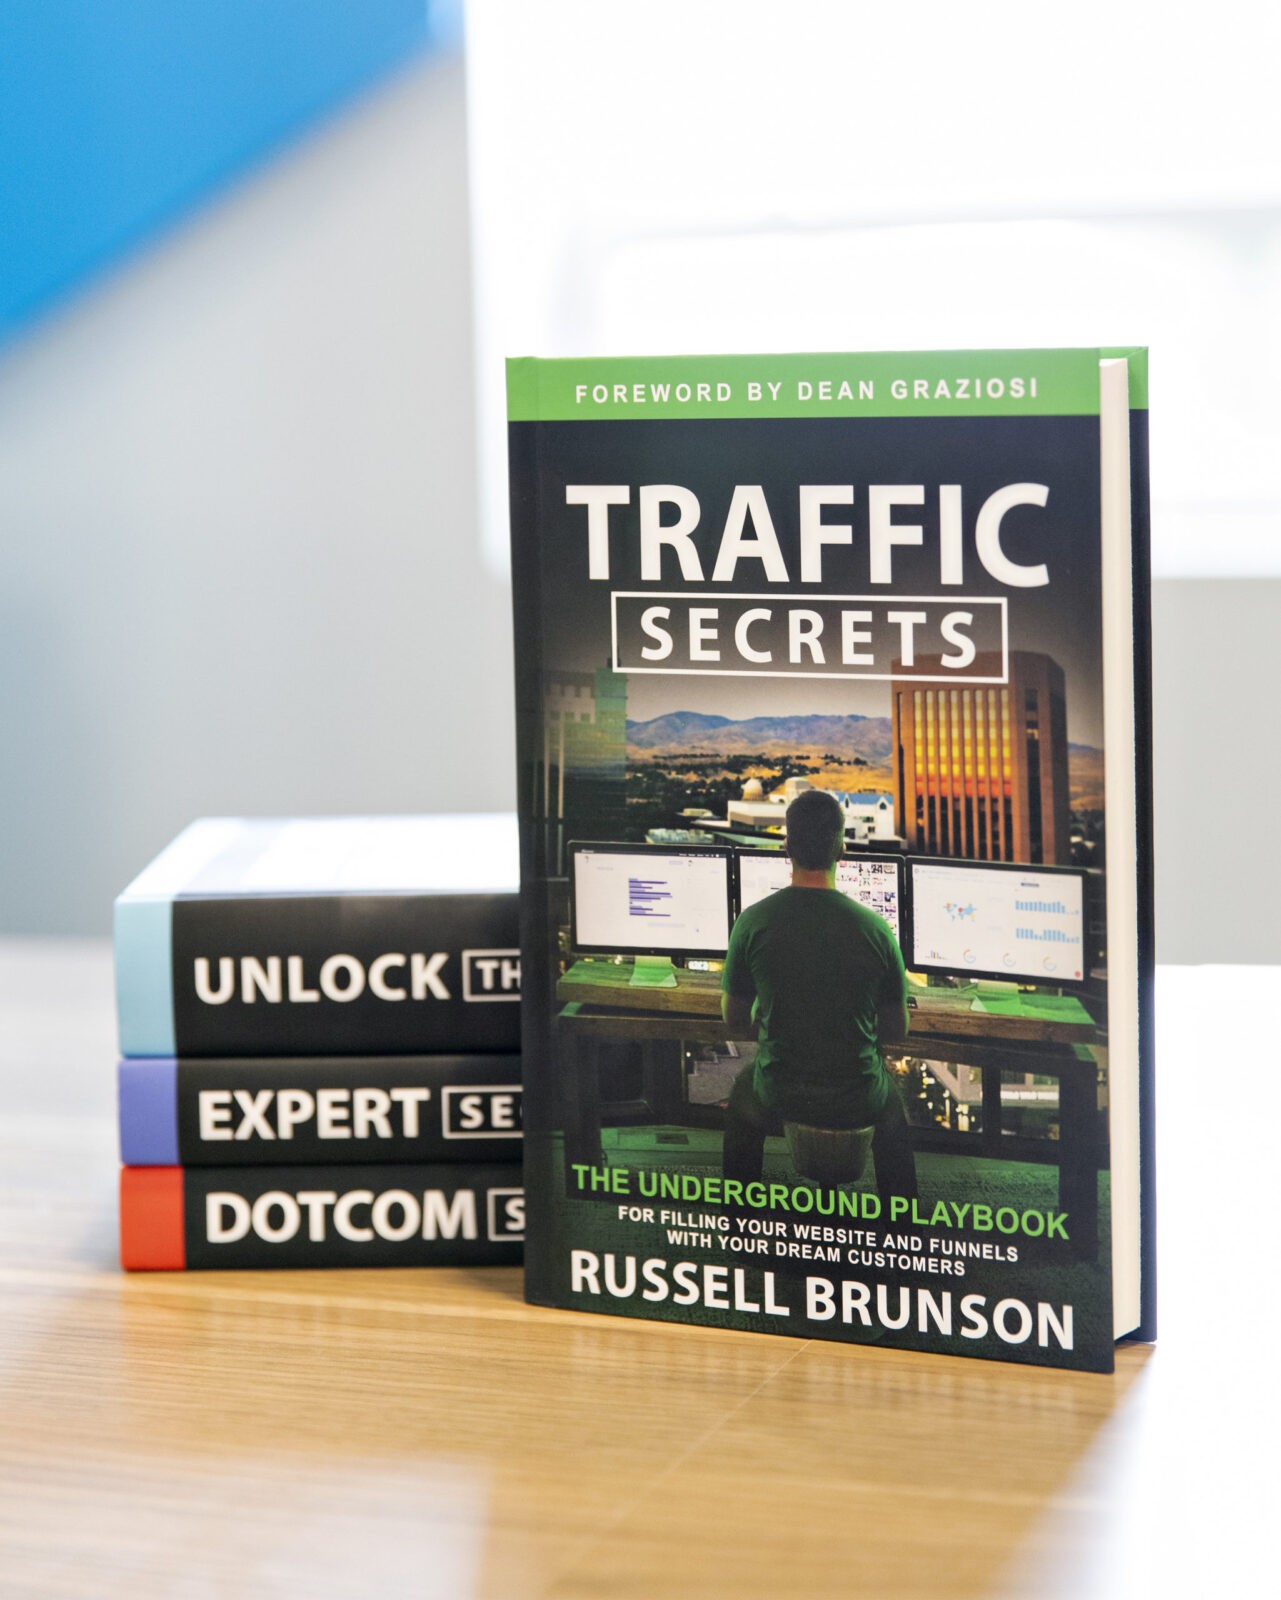 Traffic Secrets: The Underground Playbook for Filling Your Websites and Funnels with Your Dream Customers by Russell Brunson